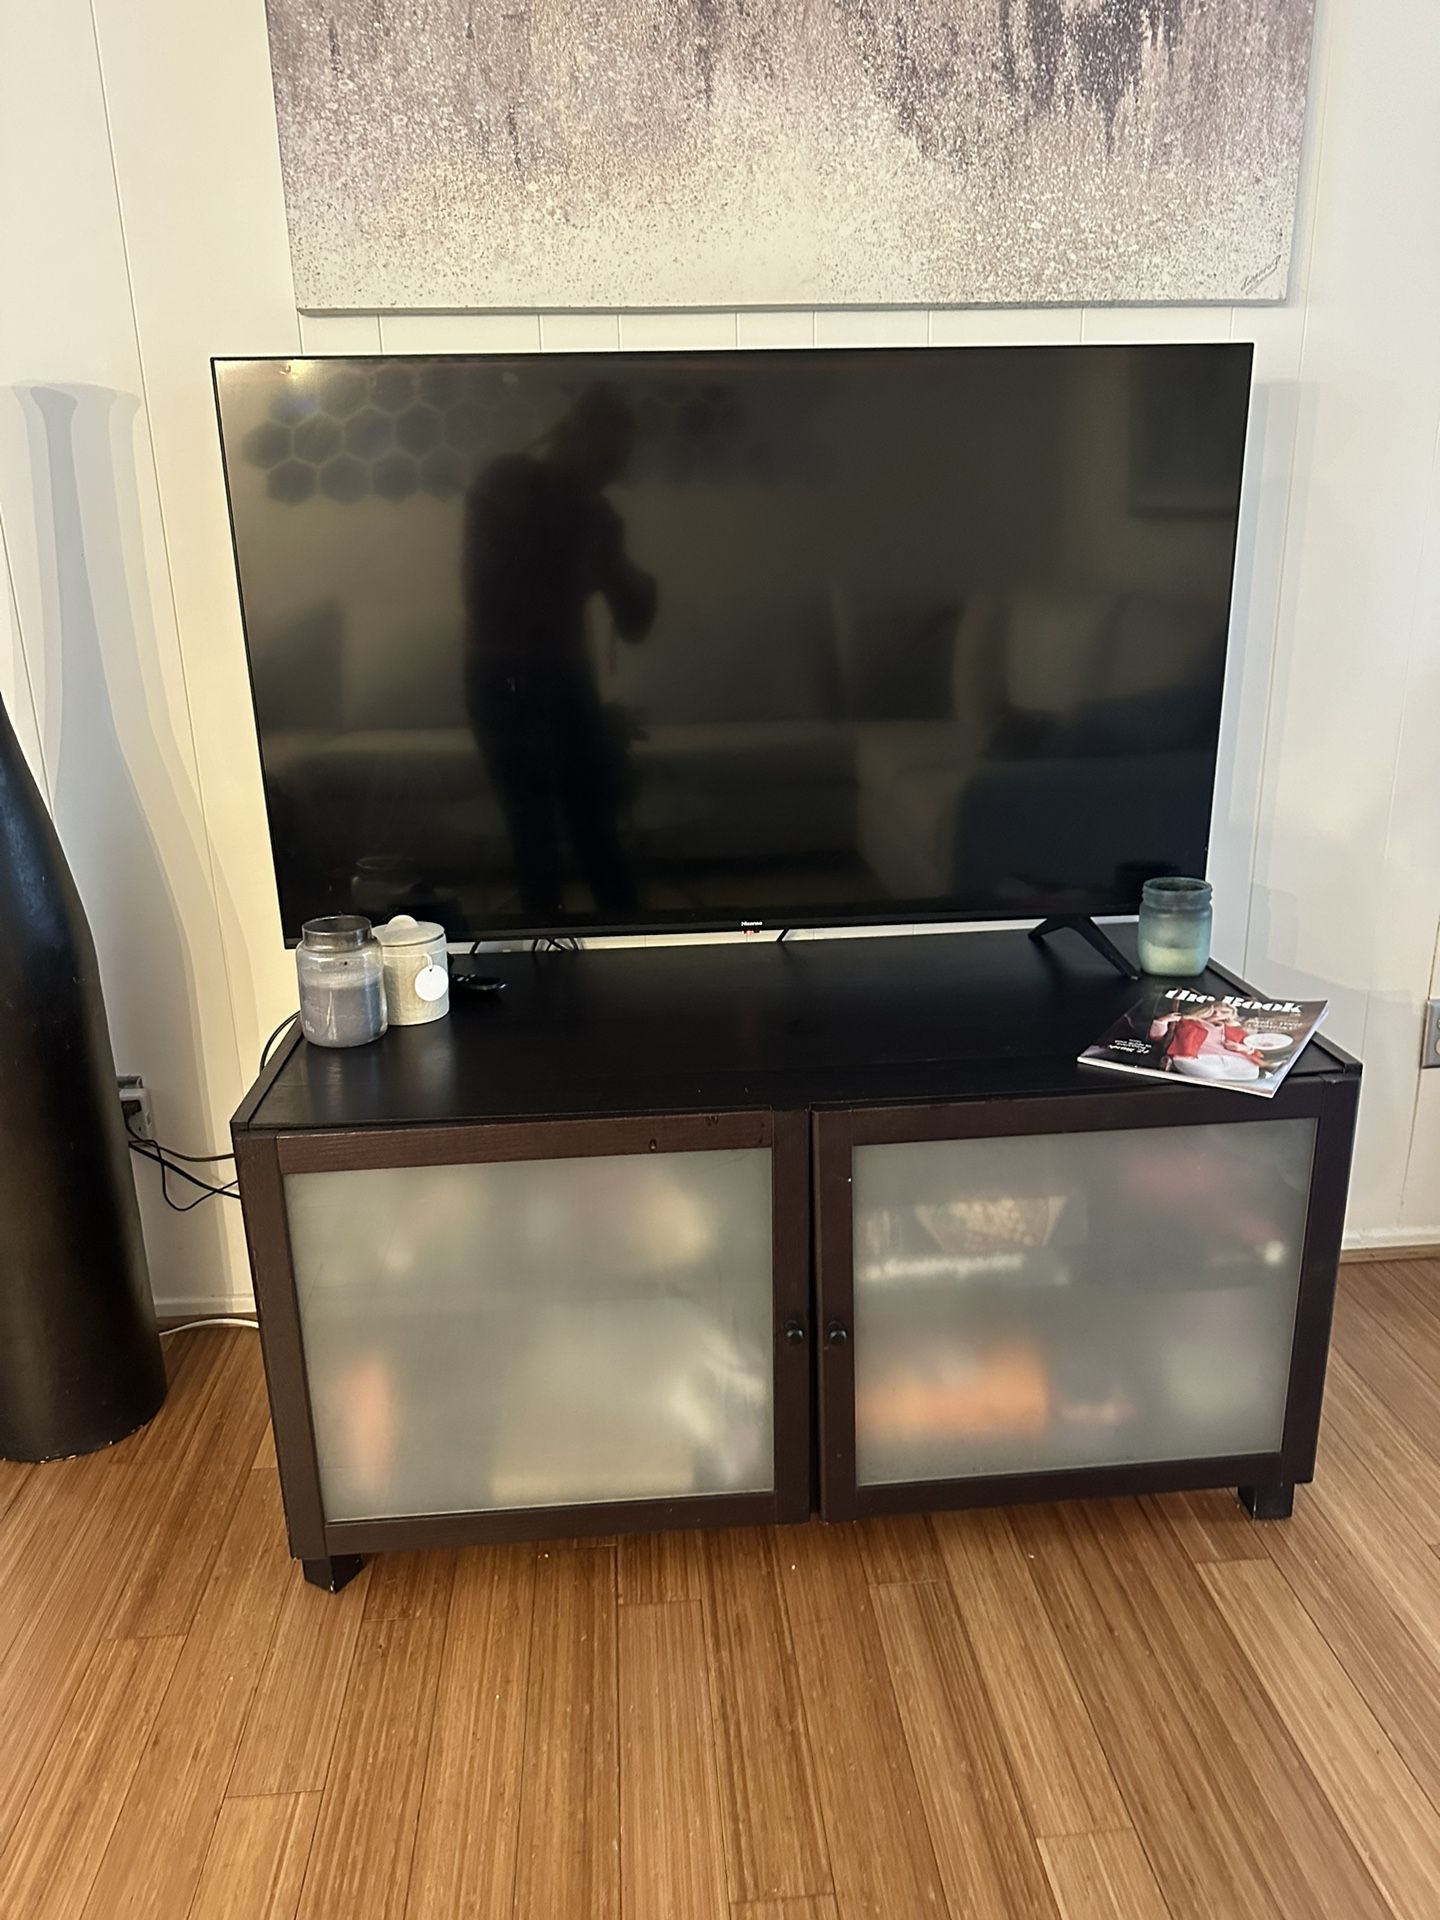 FREE: Mocha brown Tv Stand 